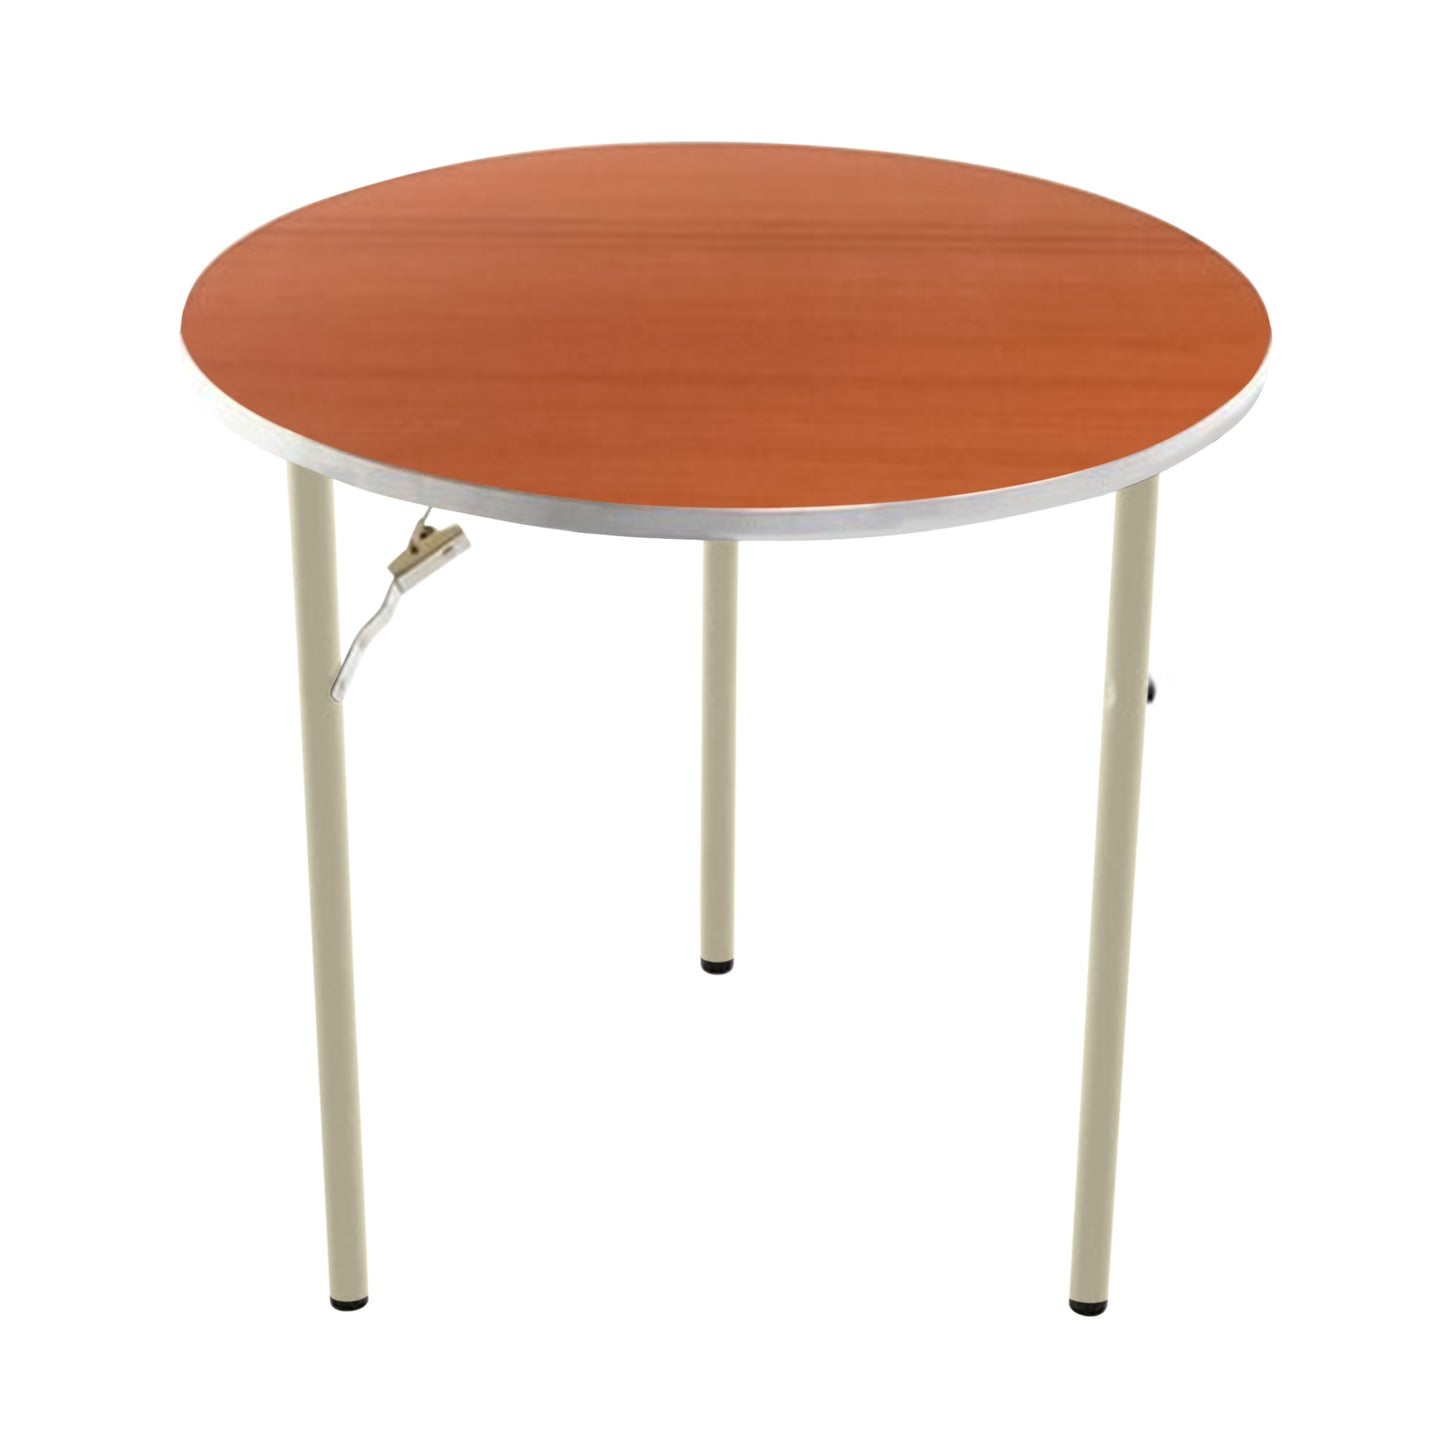 AmTab Folding Table - Plywood Stained and Sealed - Aluminum Edge - Round - 72" Diameter x 29"H  (AmTab AMT-R72PA)